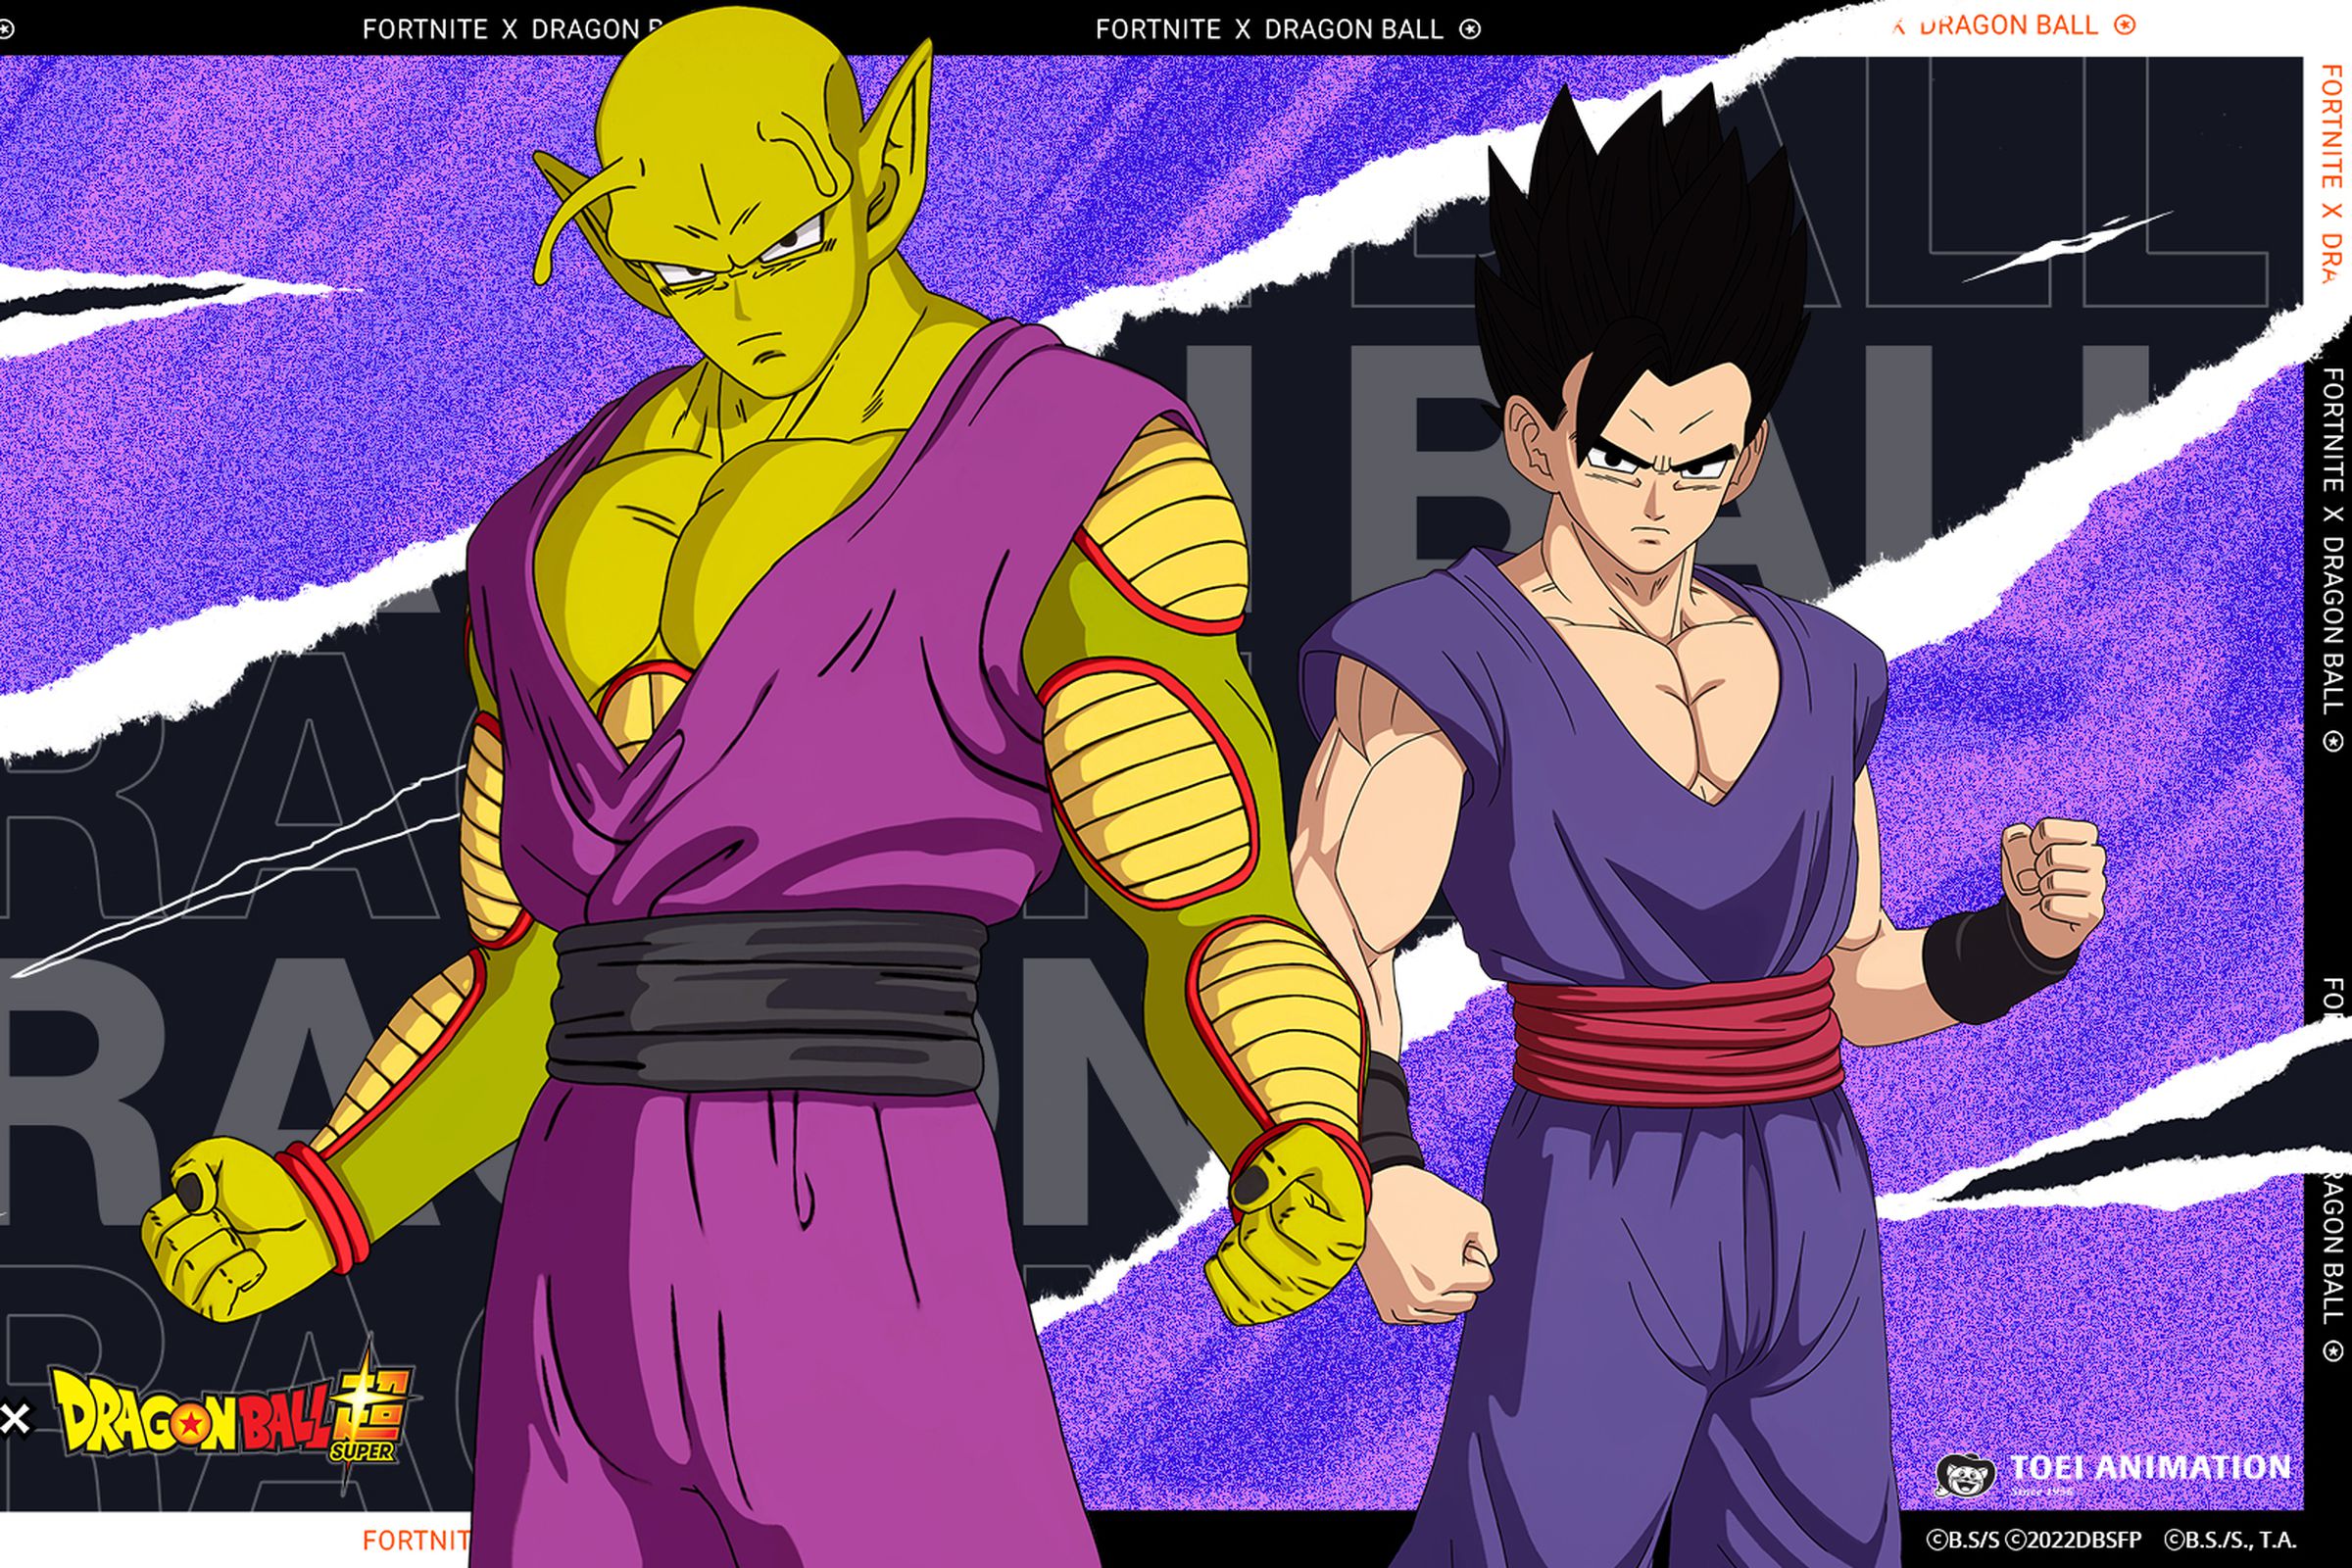 An image of Piccolo and Gohan in Fortnite.